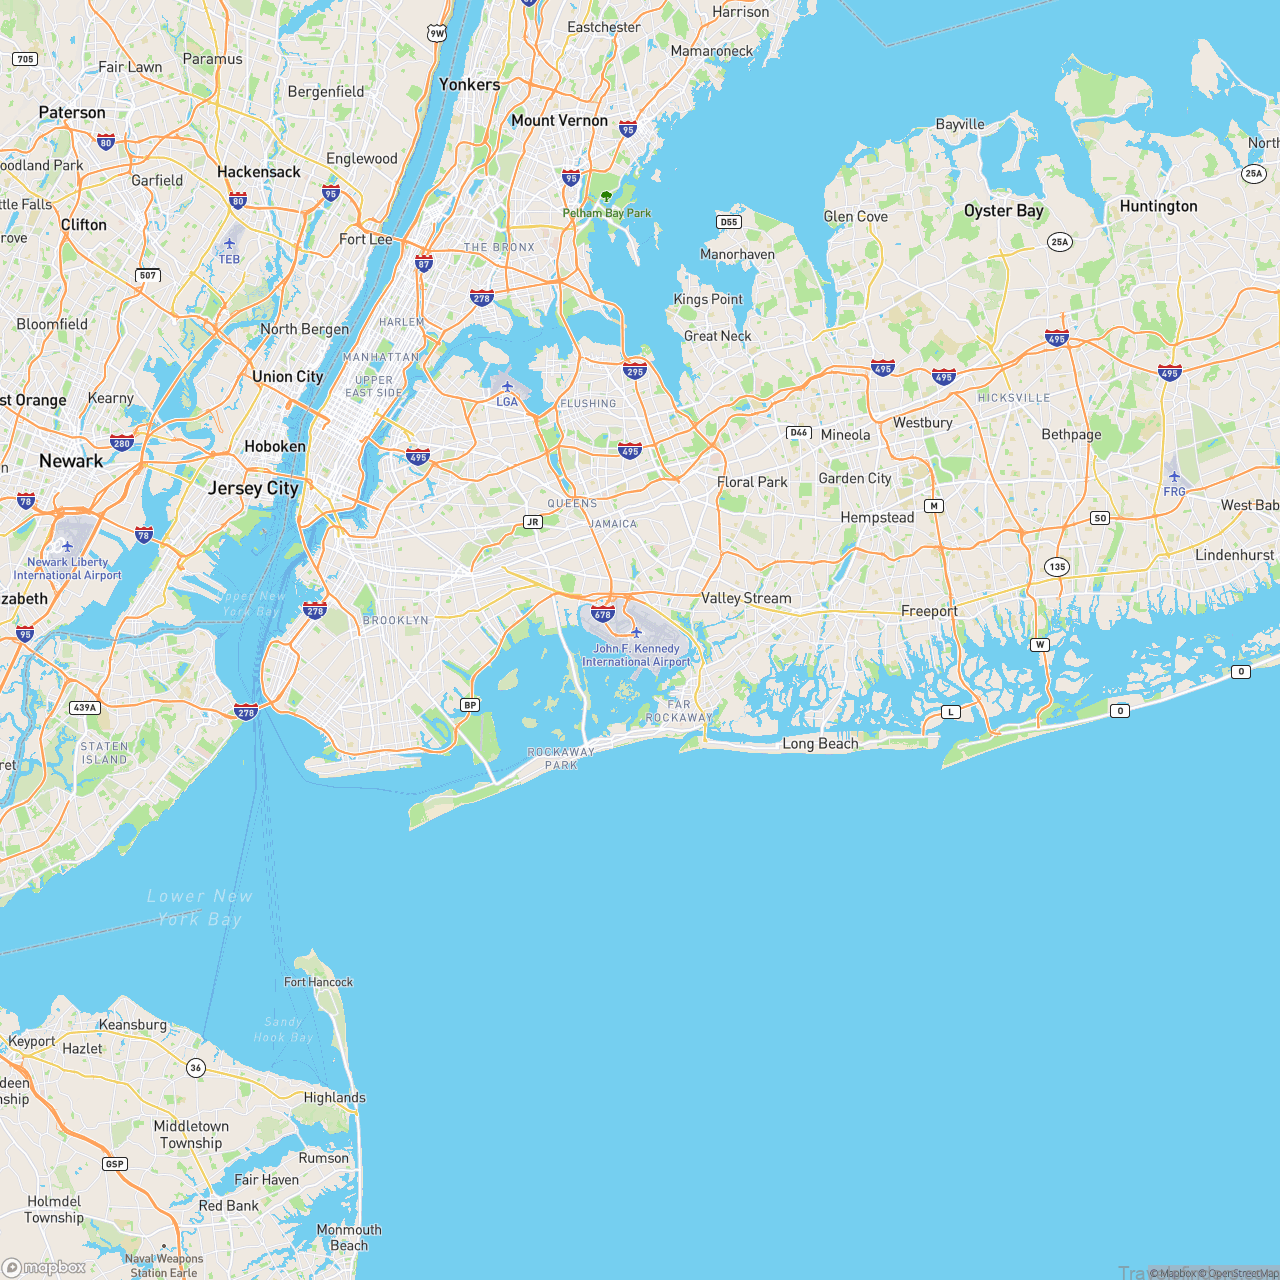 New York City Airports Map